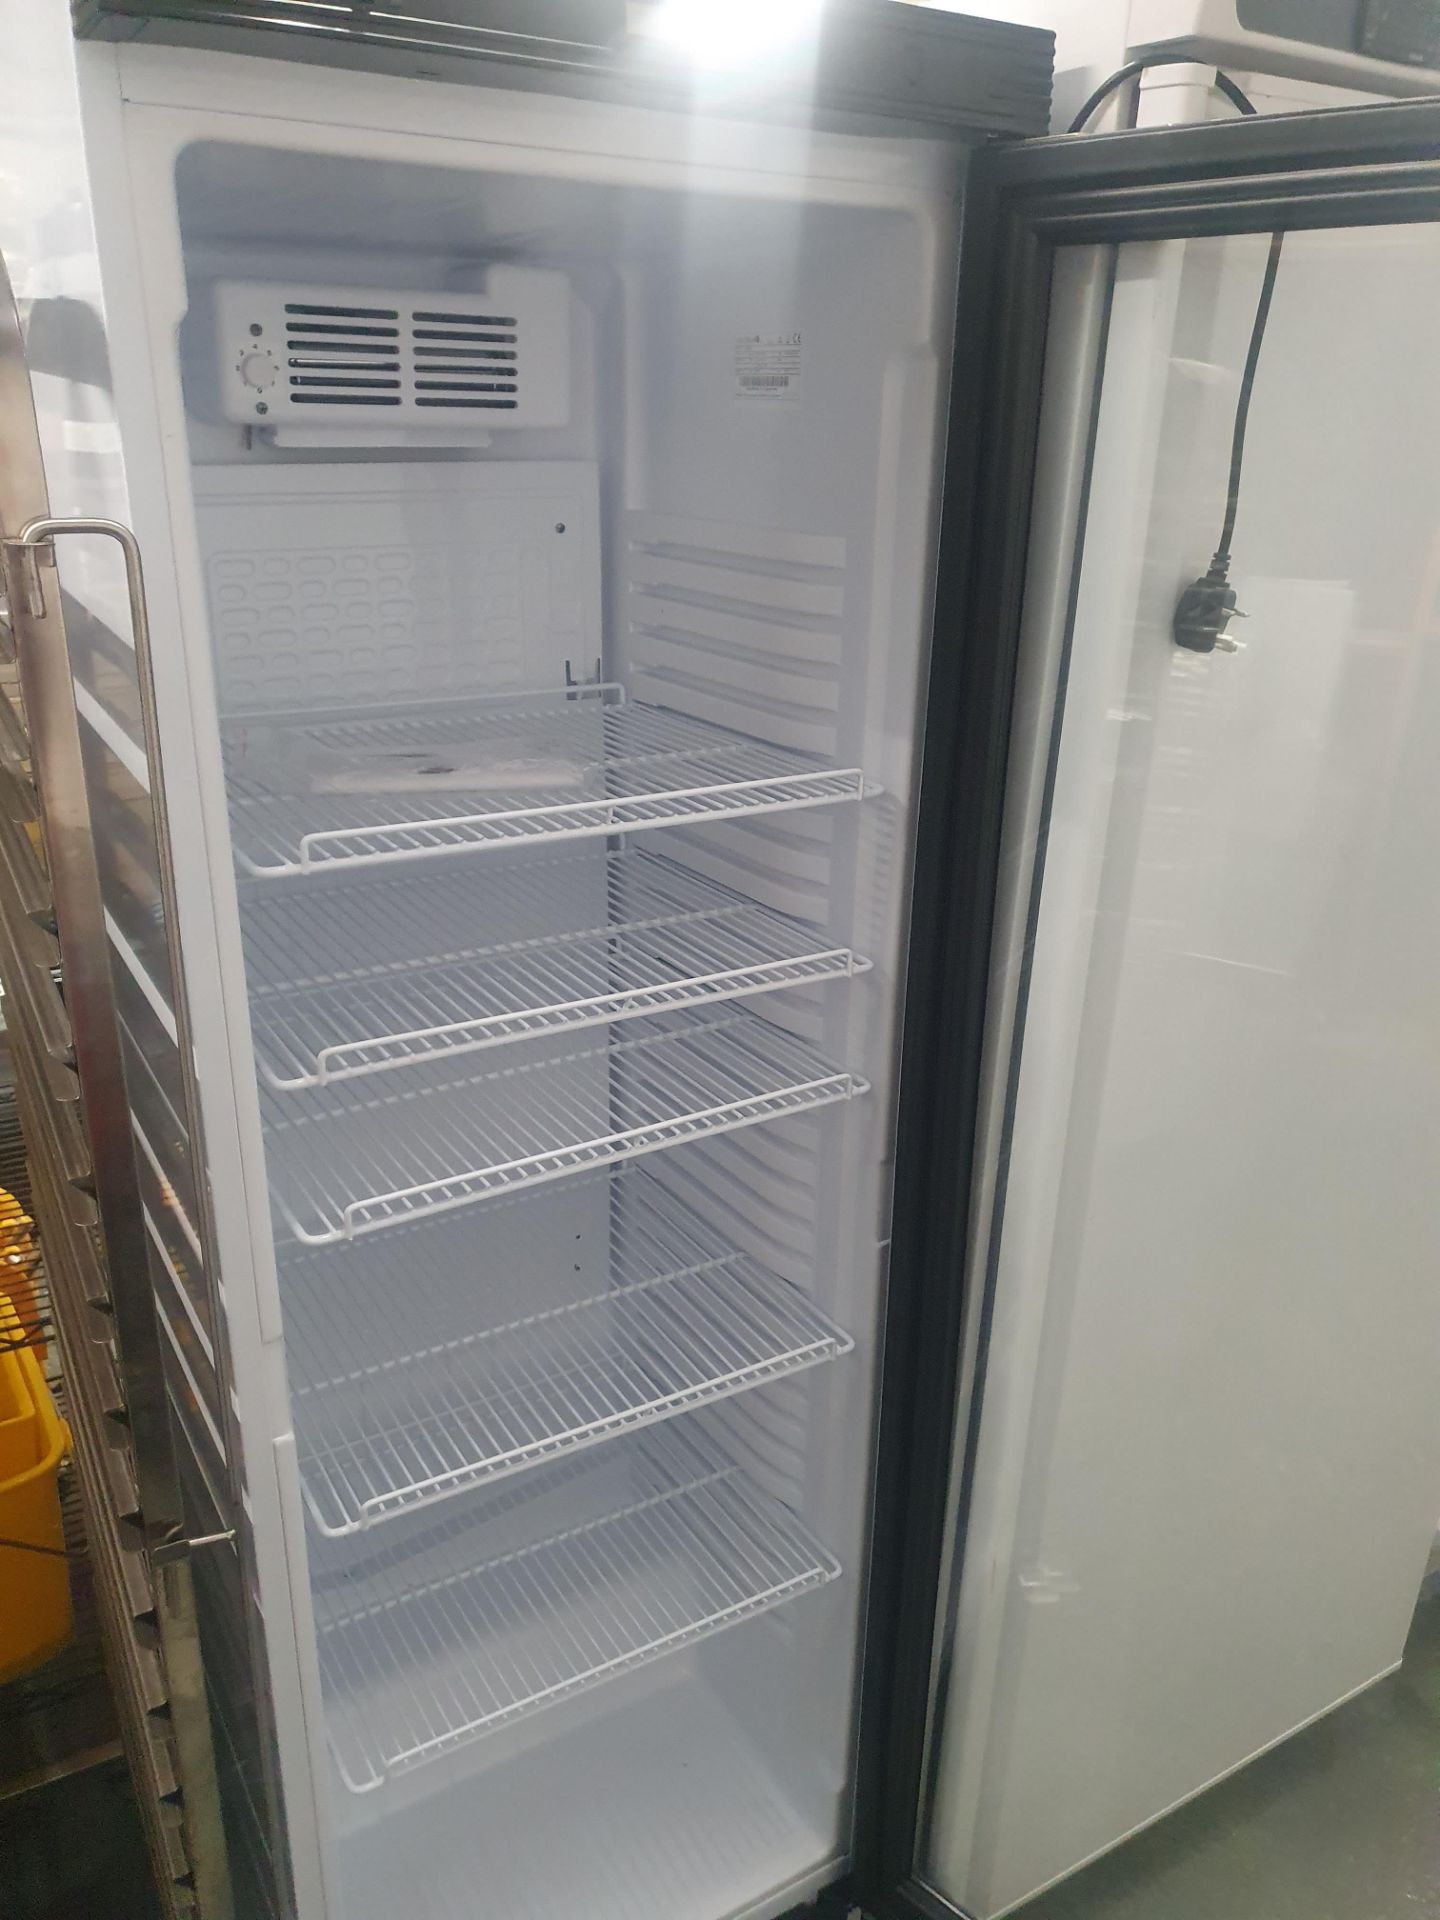 * Tefcold SC381 upright cooler with glass door - with manual - Image 2 of 4